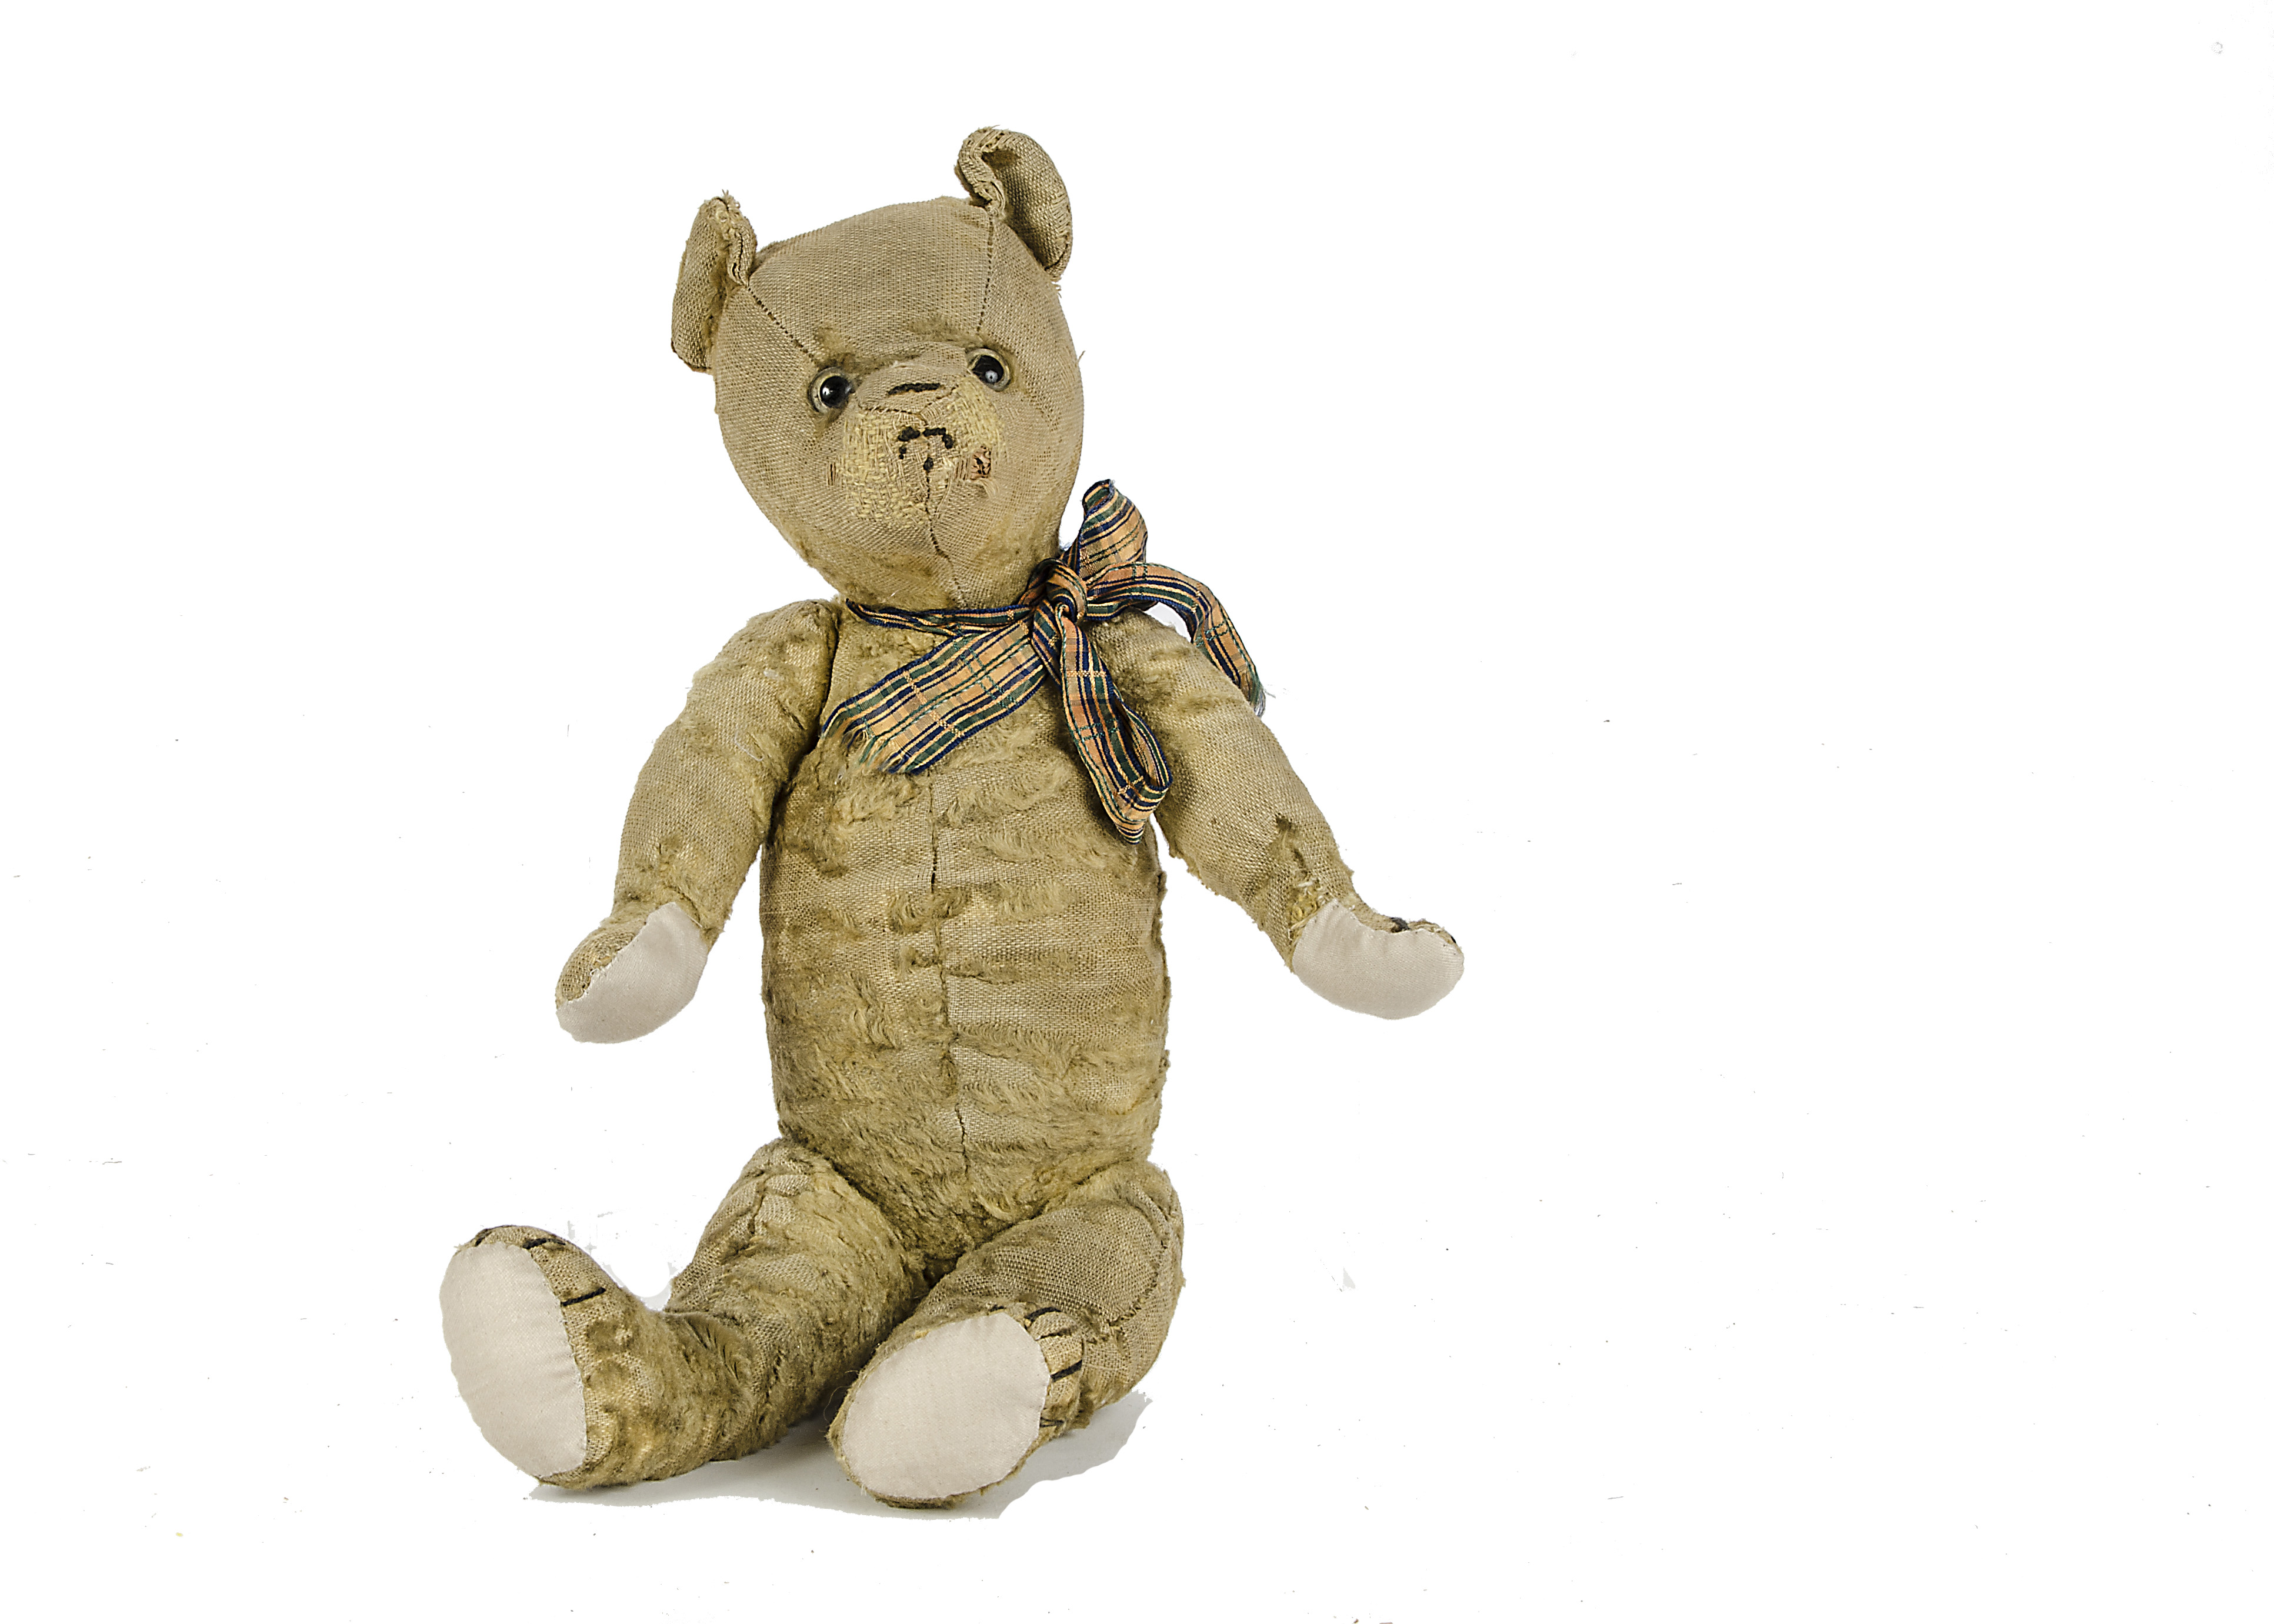 A Chiltern artificial silk plush Teddy Bear, the property of B. Taylor, 1930s, with yellow plush,